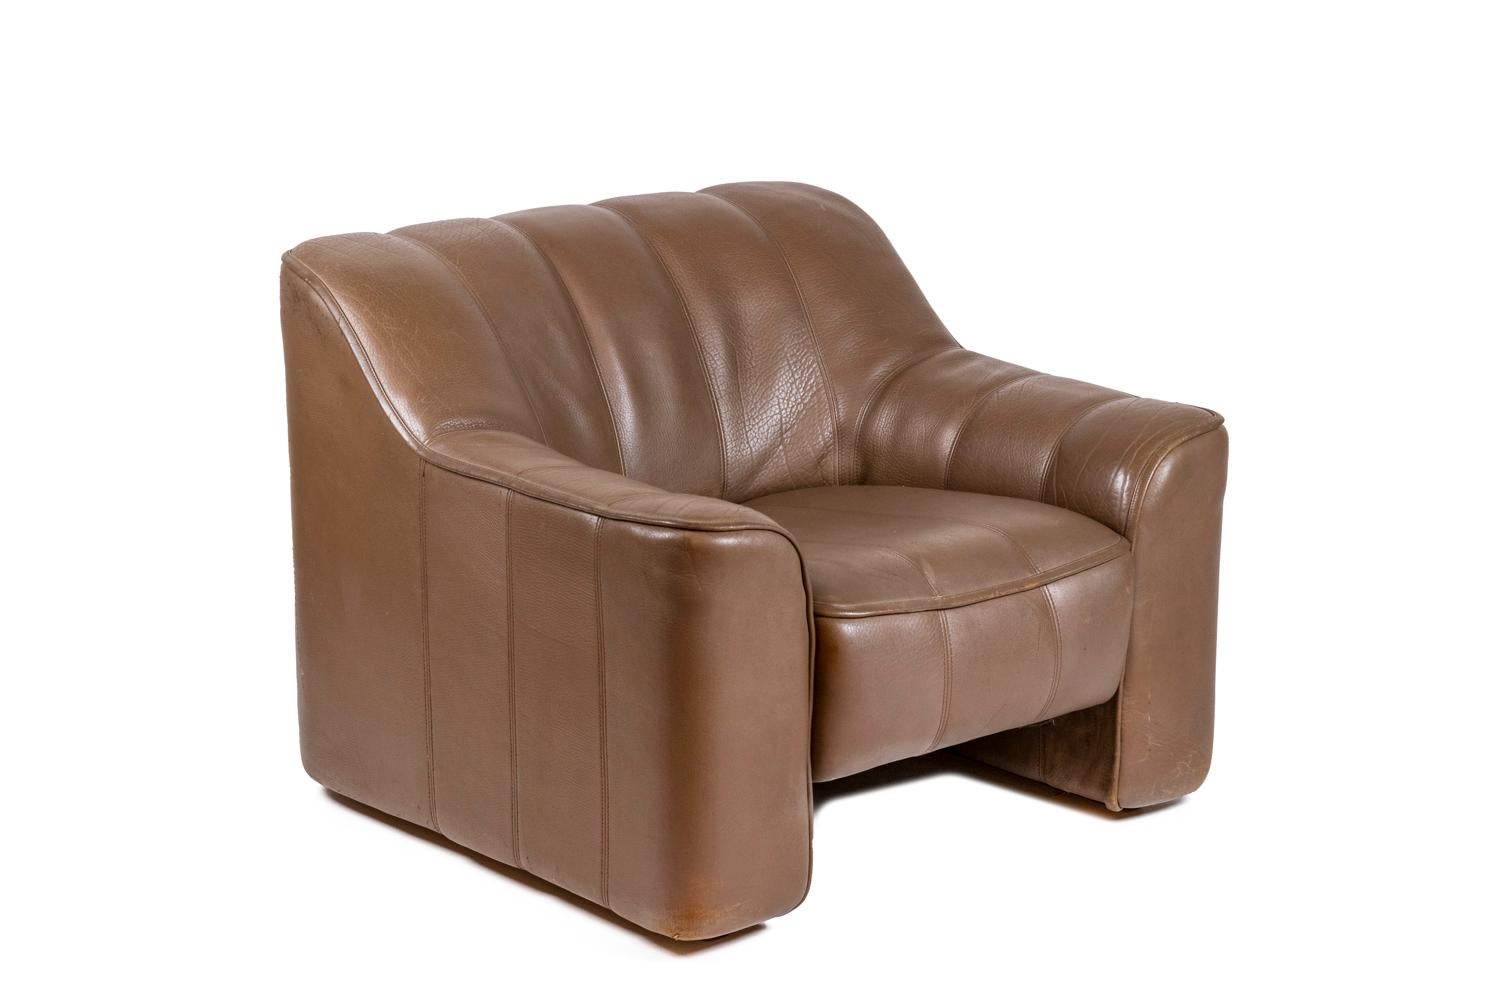 Armchair and ottoman in grooved leather, glossy brown color. Large armchair with its sliding seat. Square or cube shaped ottoman.

Work realized in the 1970s.

Dimensions : armchair : H 70 x W 86 x D 80 cm ; ottoman : H 35 x W 60 x D 55 cm.